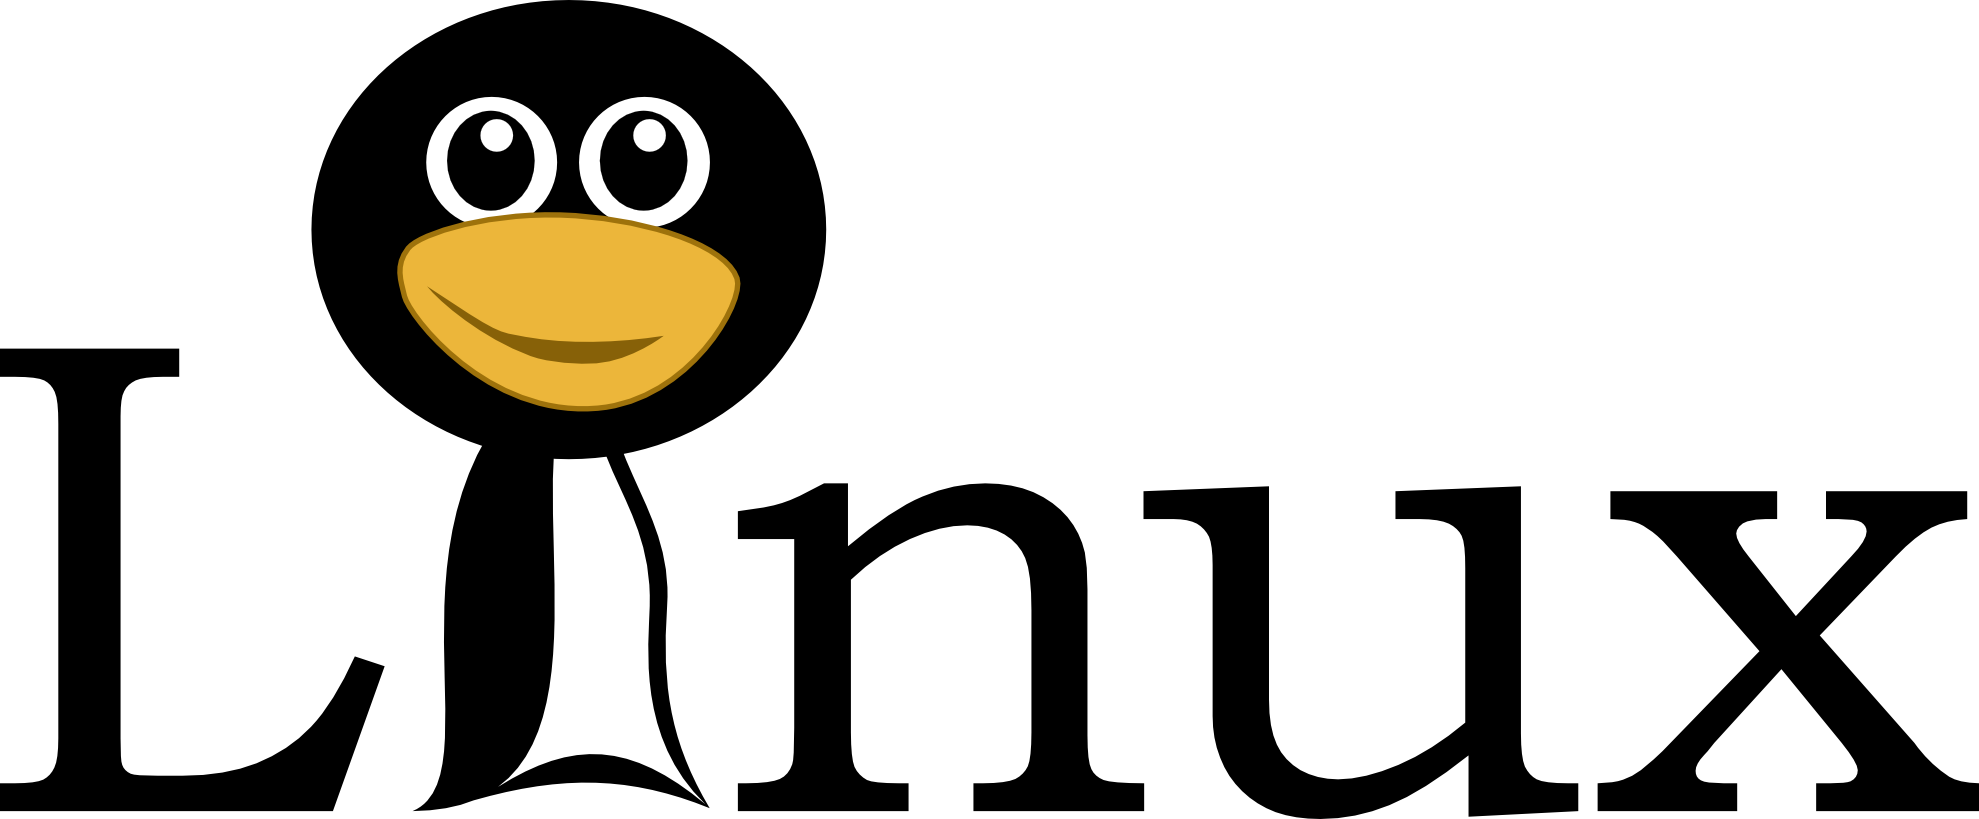 Linux 1 Text W Penguin Head Cartoon Scallywag March - Linux Png (1979x819)